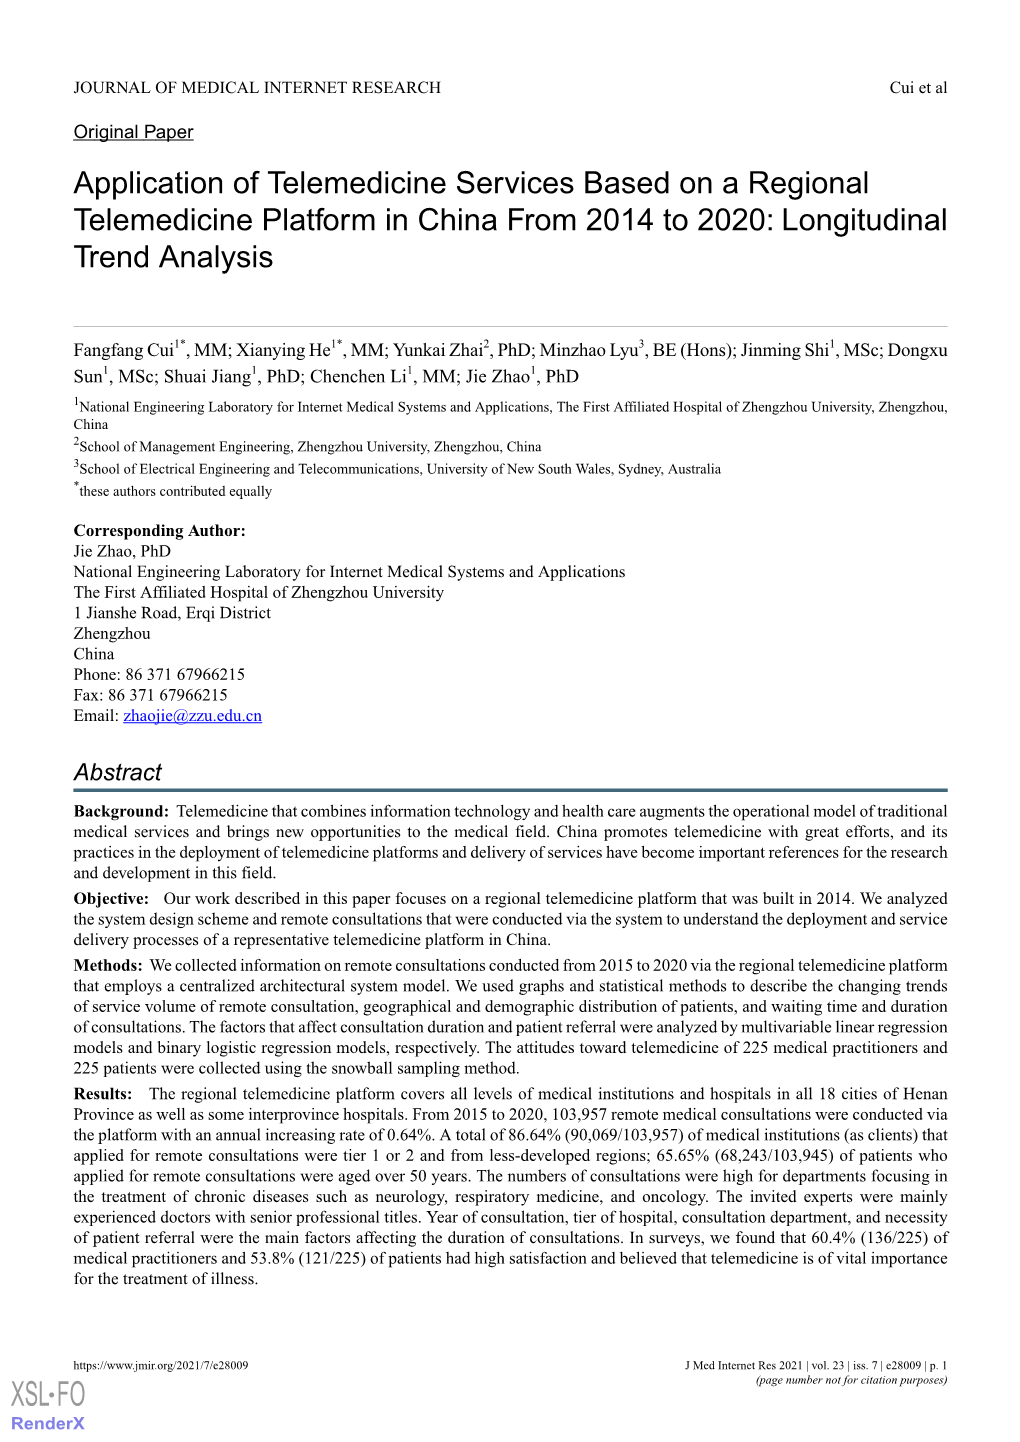 Application of Telemedicine Services Based on a Regional Telemedicine Platform in China from 2014 to 2020: Longitudinal Trend Analysis